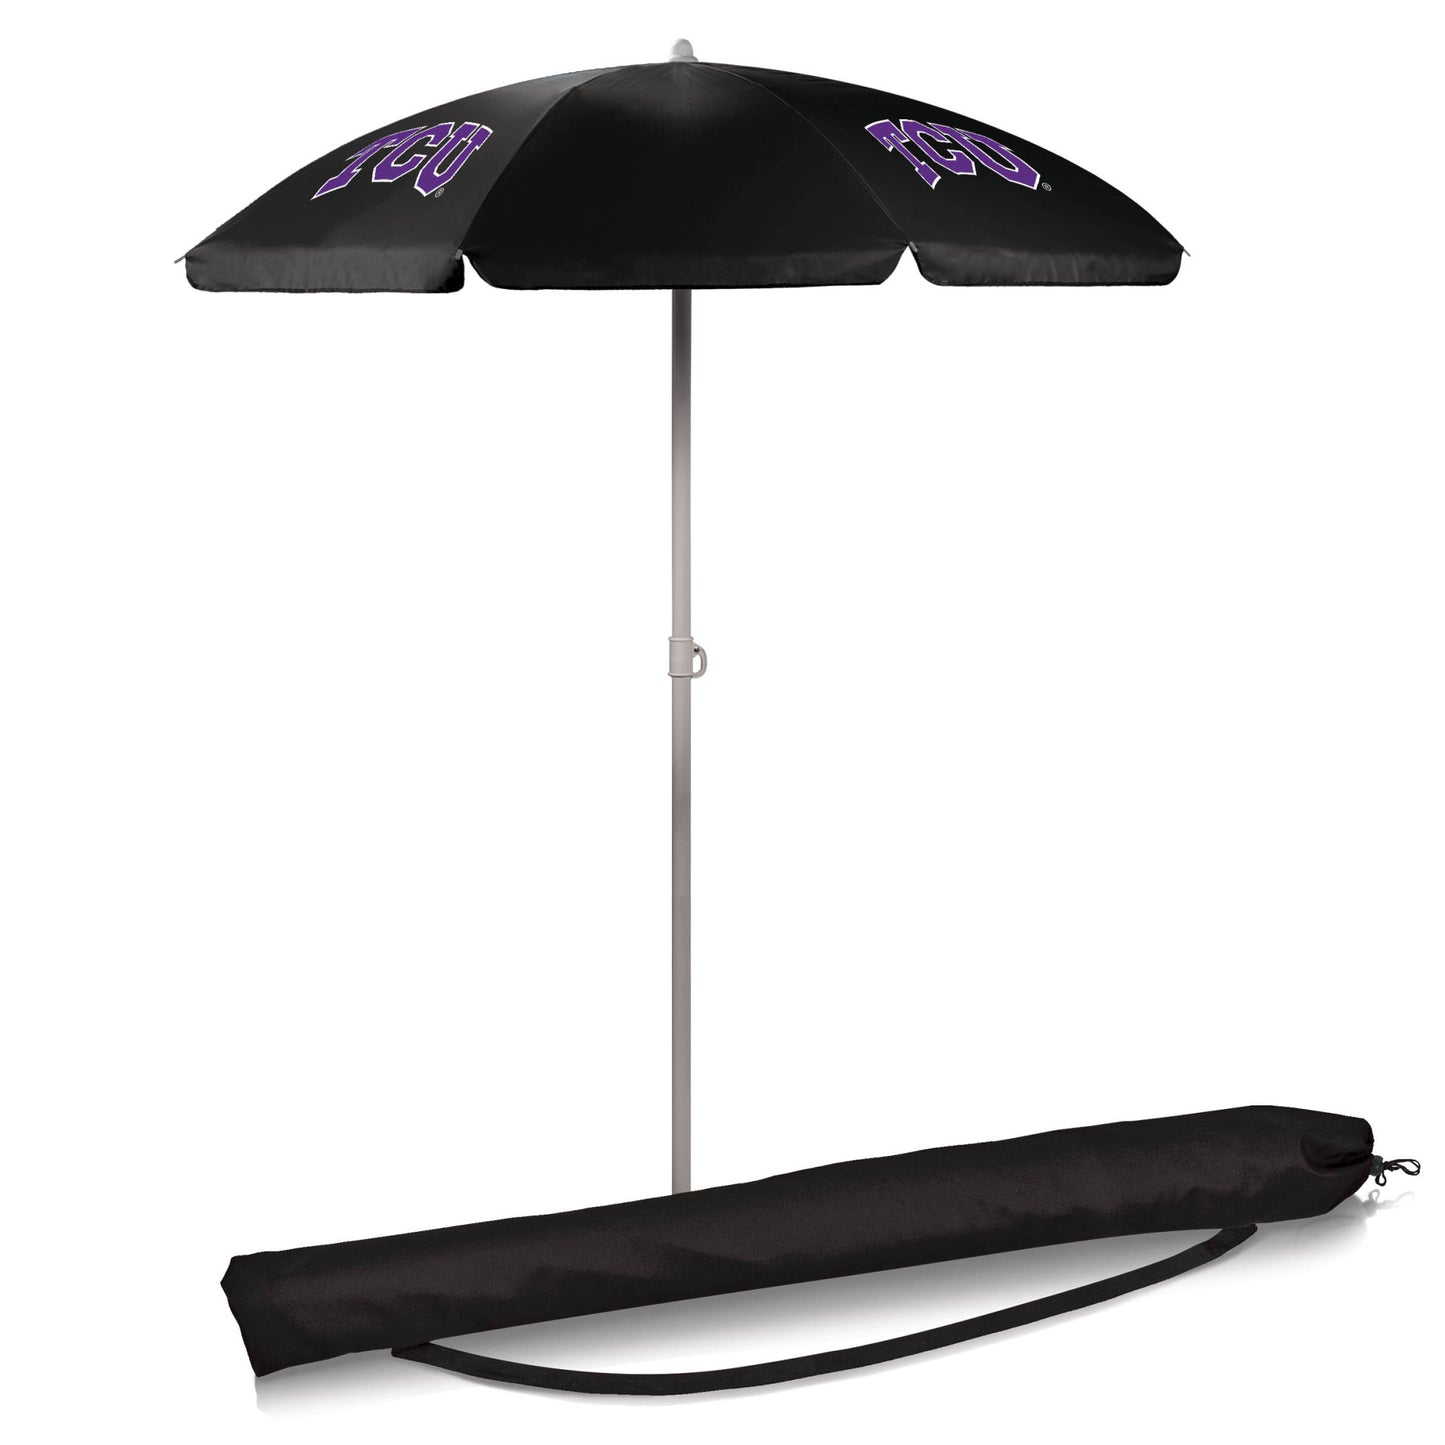 Texas Christian {TCU} Horned Frogs 5.5' Portable Beach Umbrella by Picnic Time